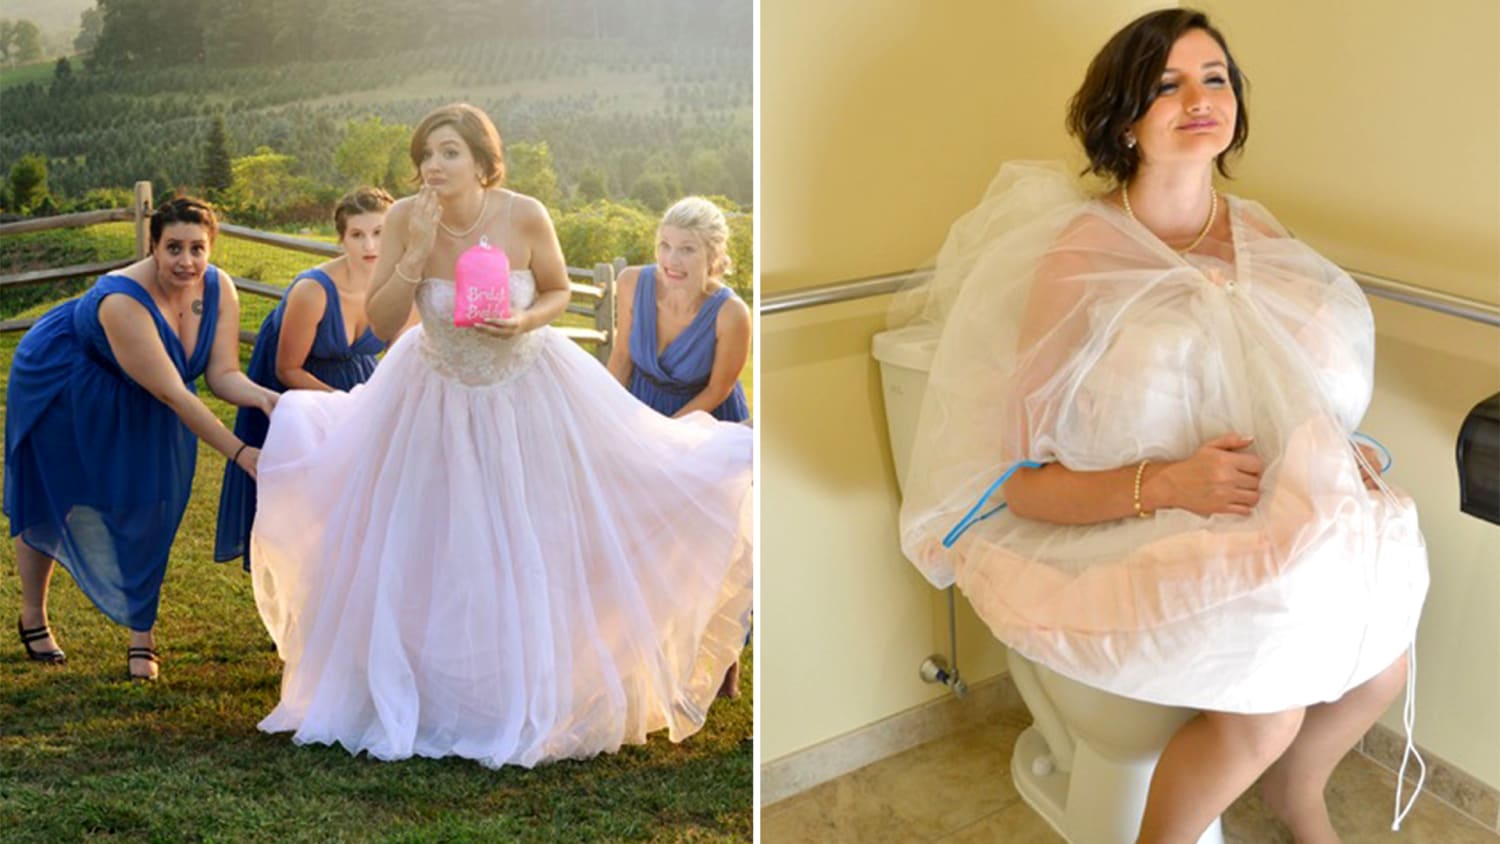 Bridal Buddy makes it easier for brides to use the bathroom in their